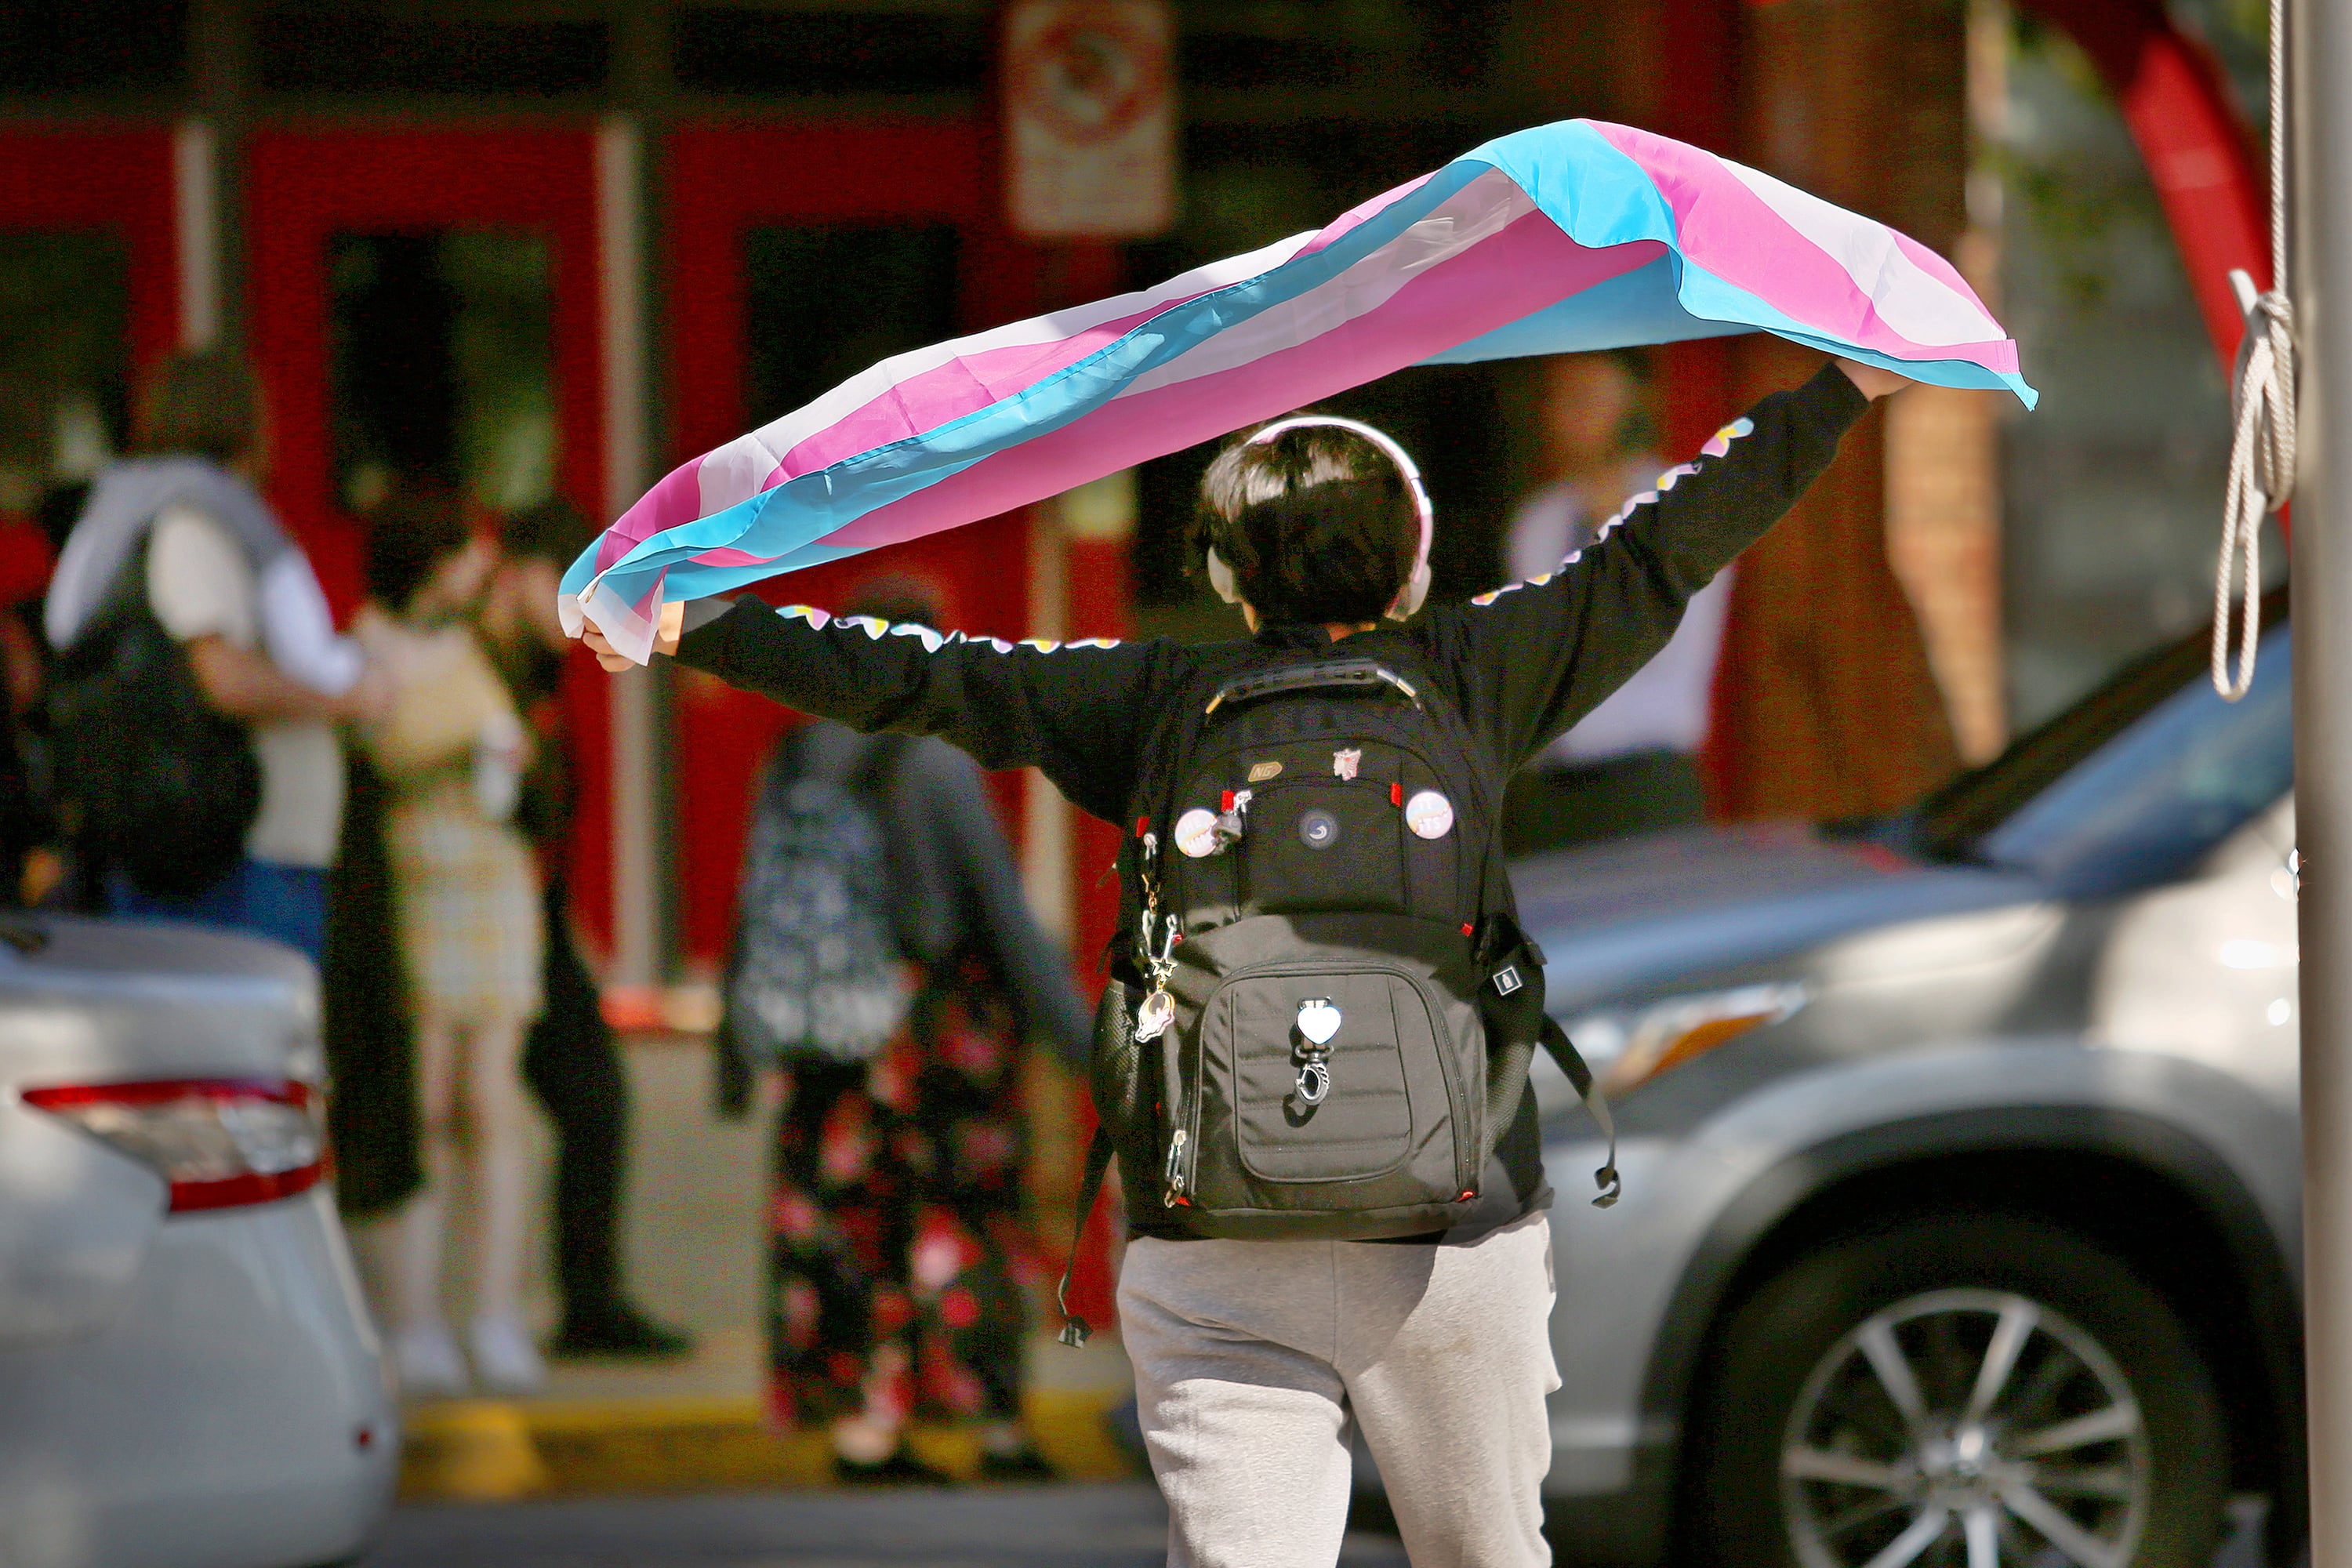 A high school student wearing a black backpack and holding a transgender flag above their head walks toward a building with people and cars in the background.